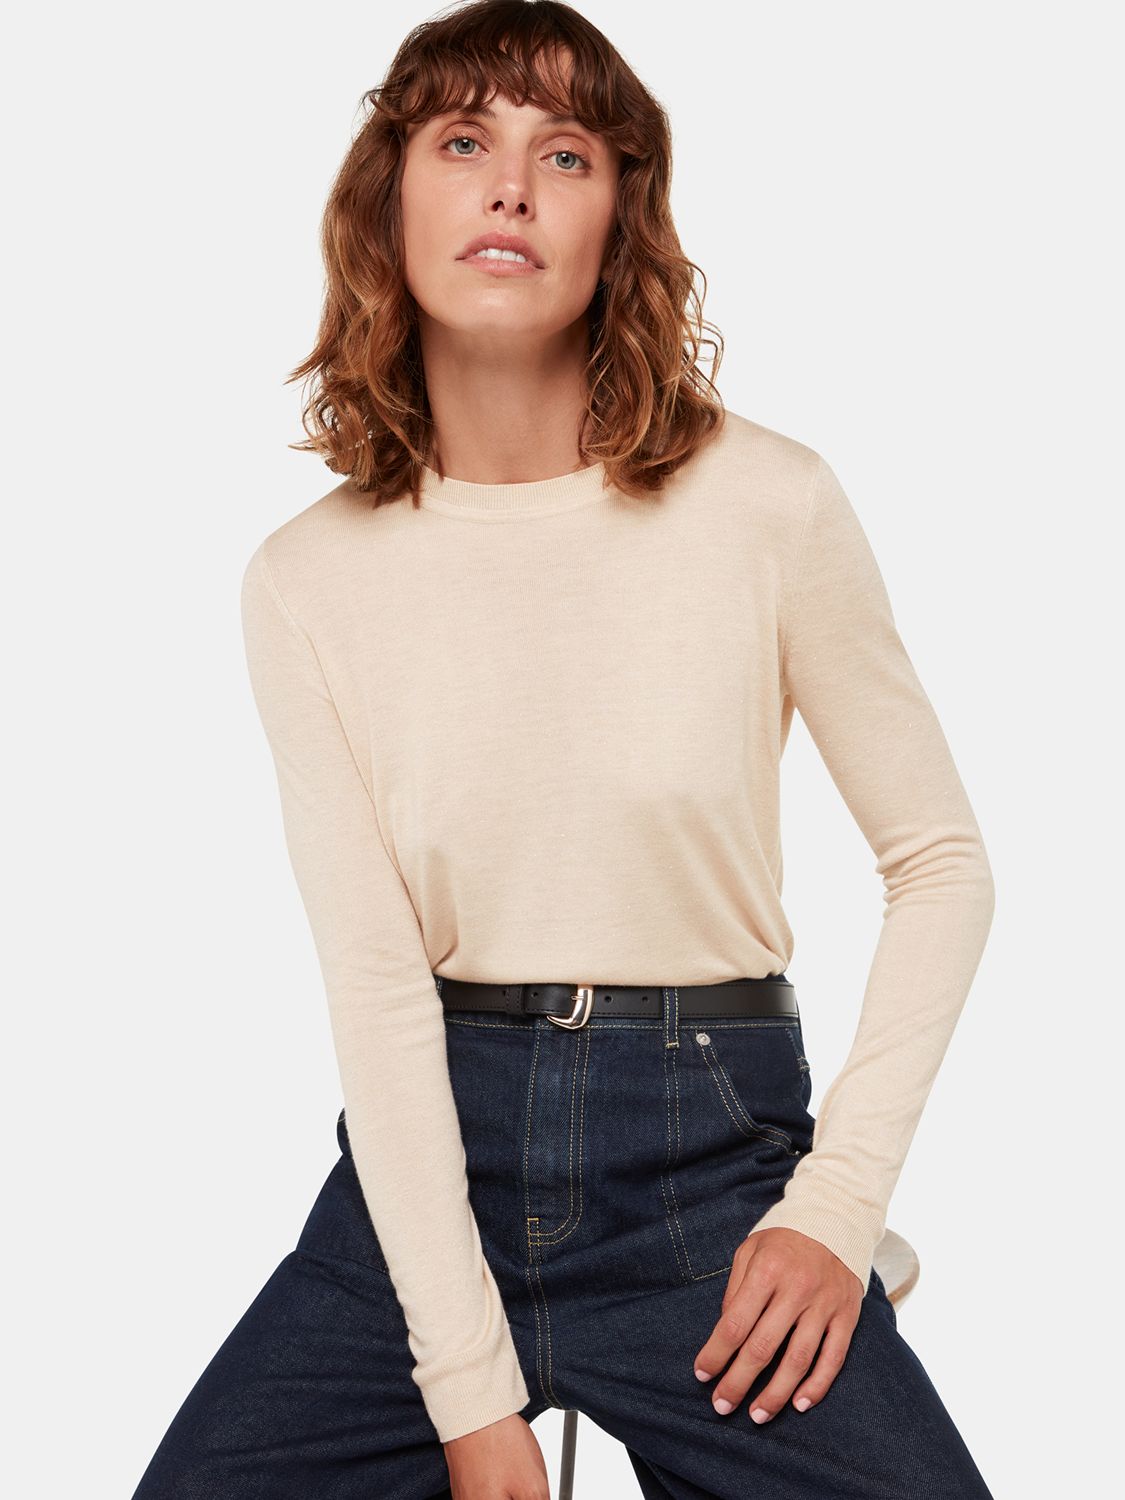 Whistles Annie Sparkle Crew Neck Jumper, Ivory at John Lewis & Partners